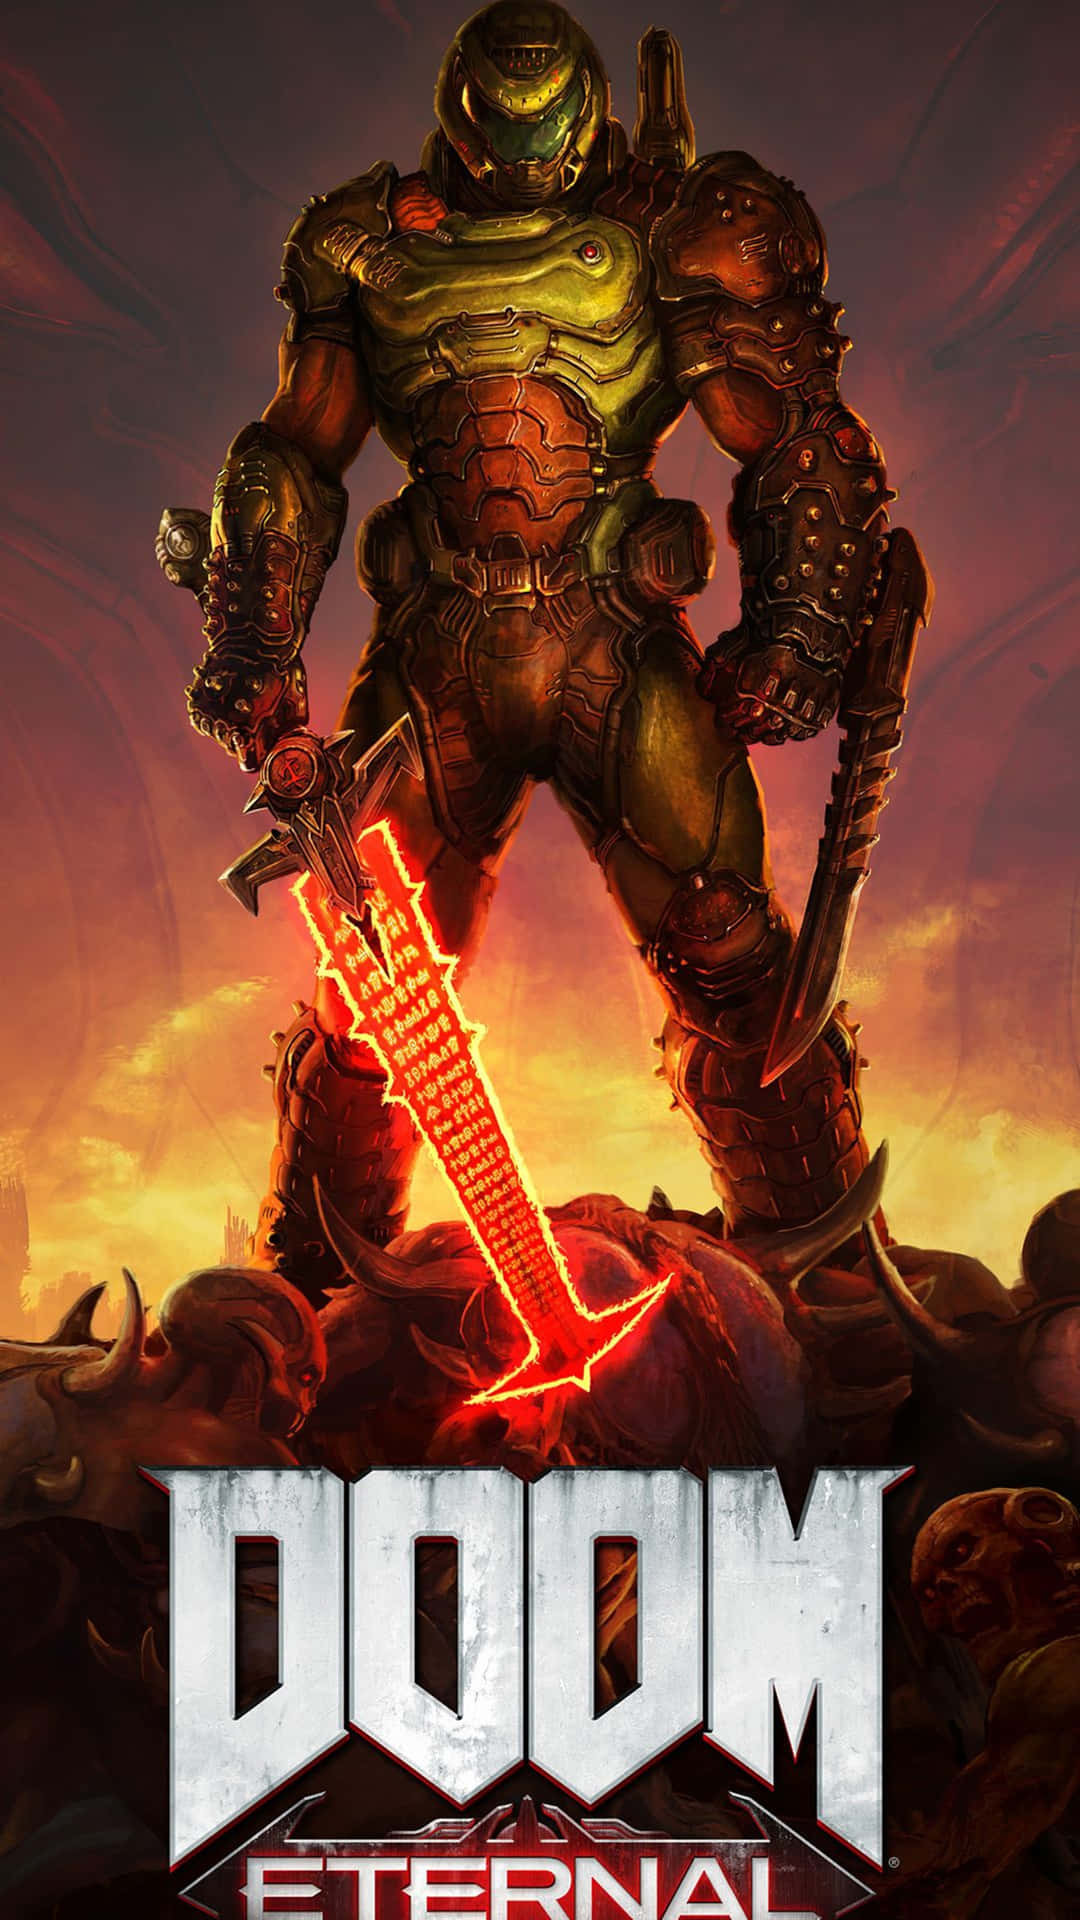 Experience The Intense Action And Heart-pumping Adventure Of Doom Eternal In Breathtaking, 4k Background